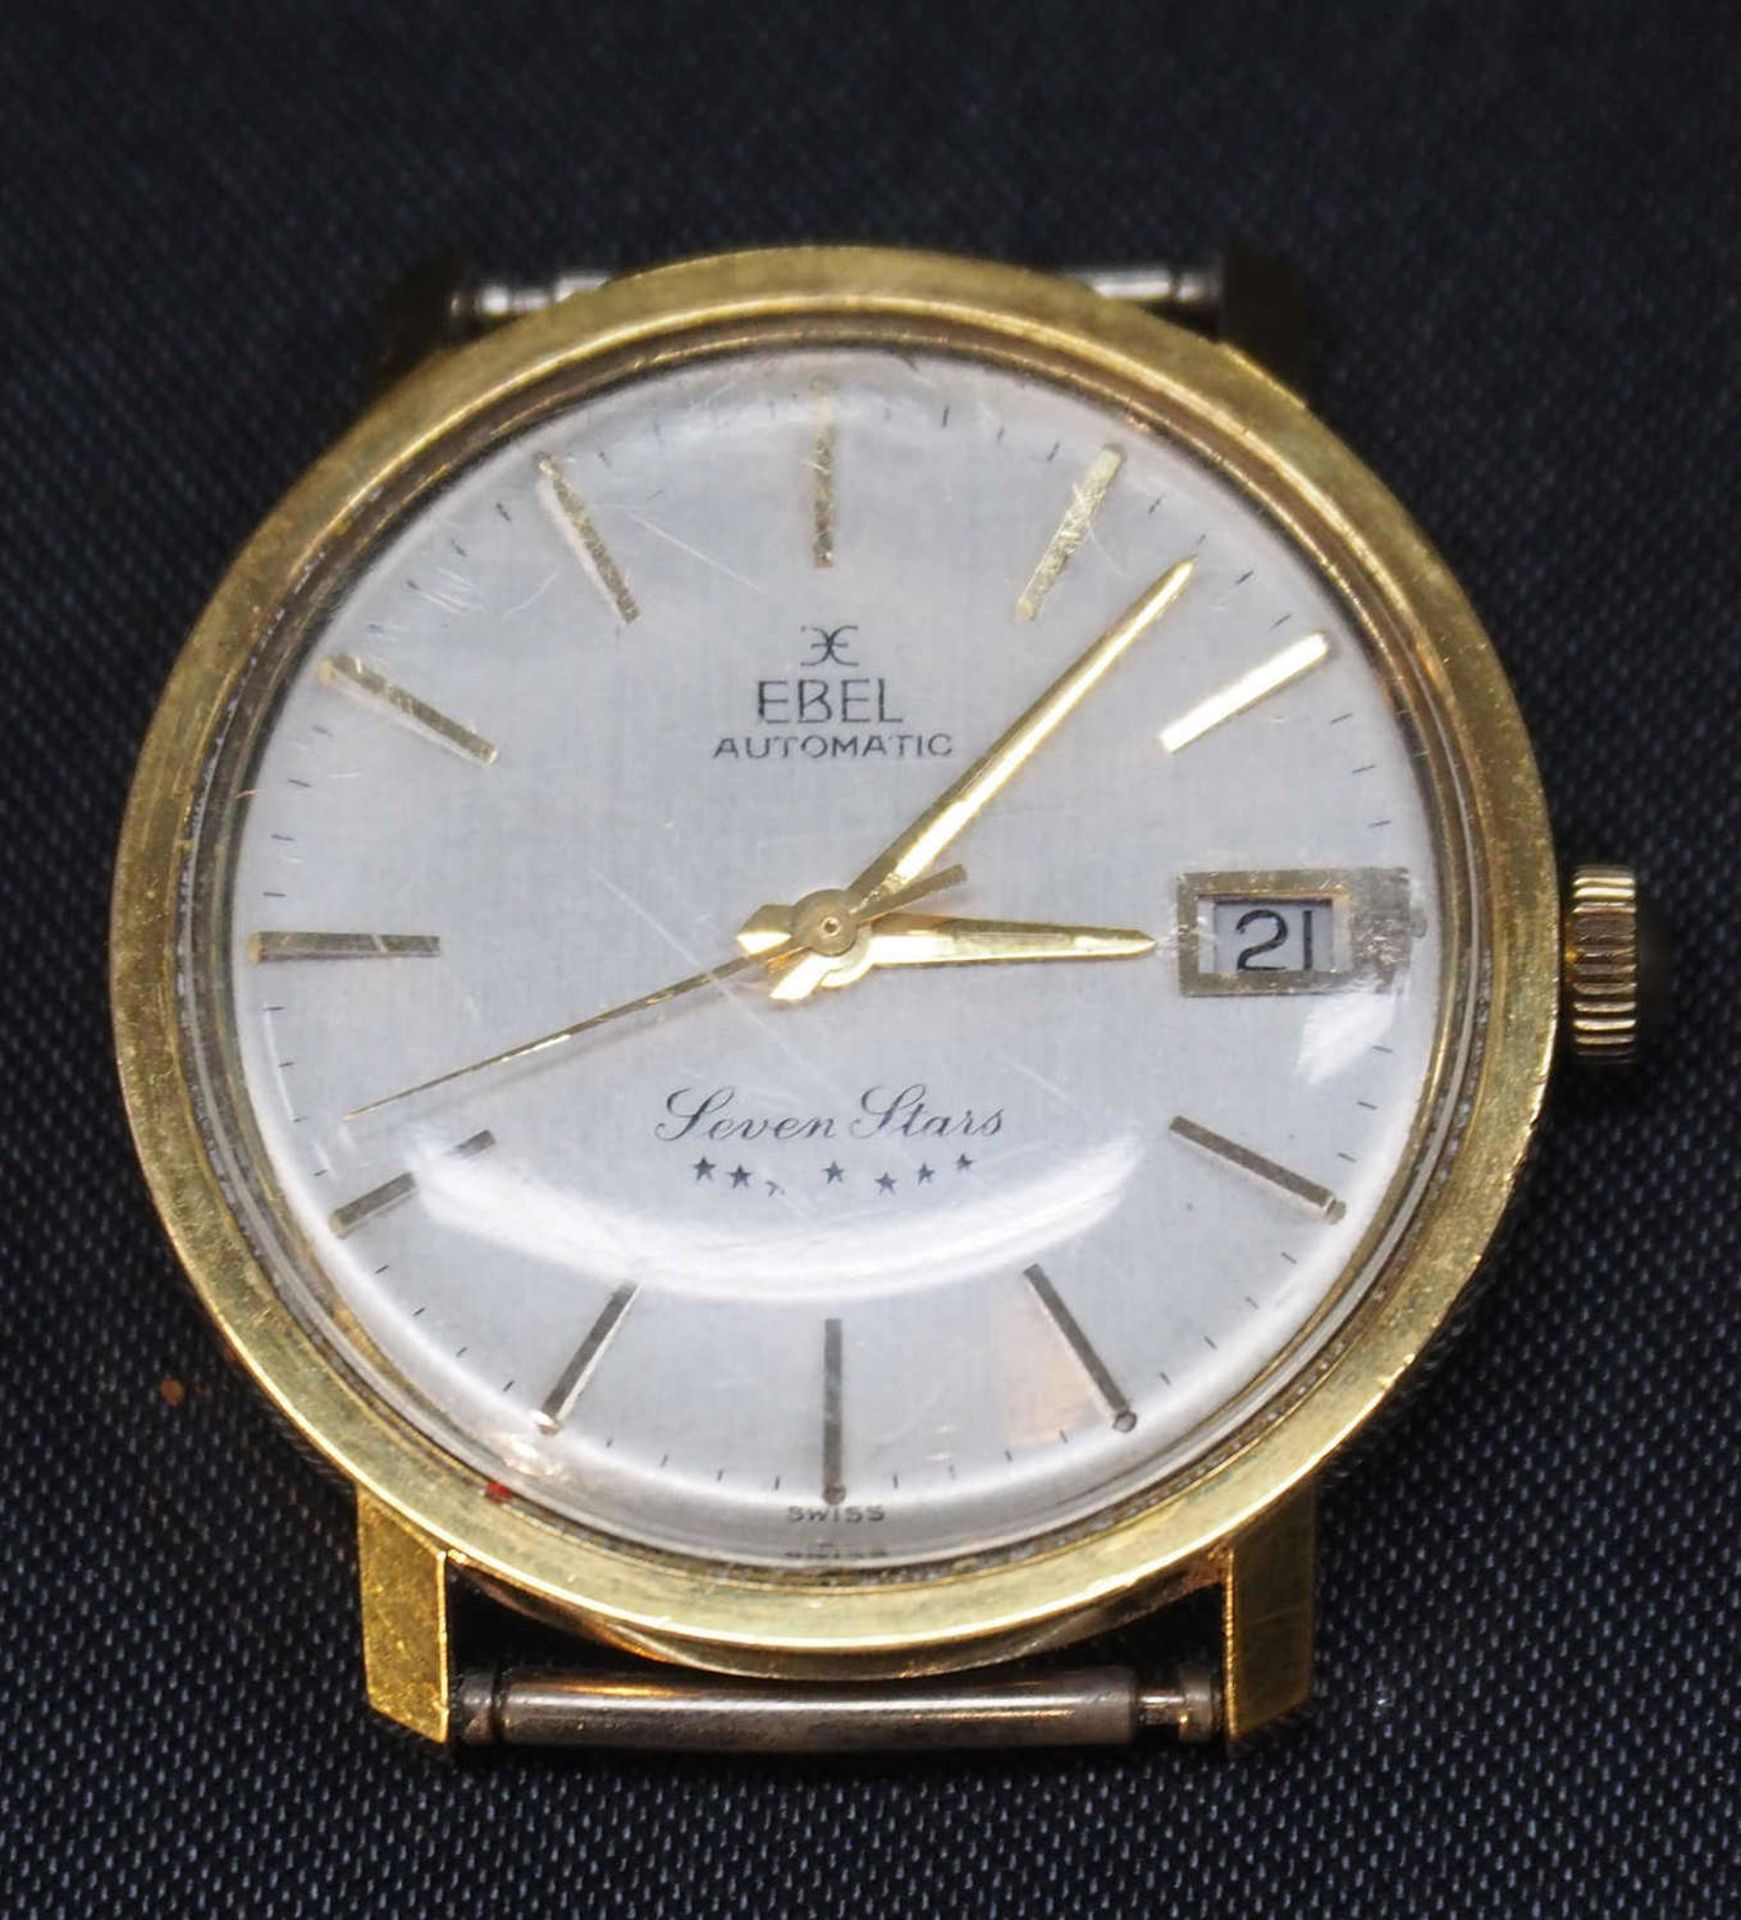 Men's wristwatch, Ebel Automatic, Seven Stars, with signs of wear. Function ok. Without a bracelet.